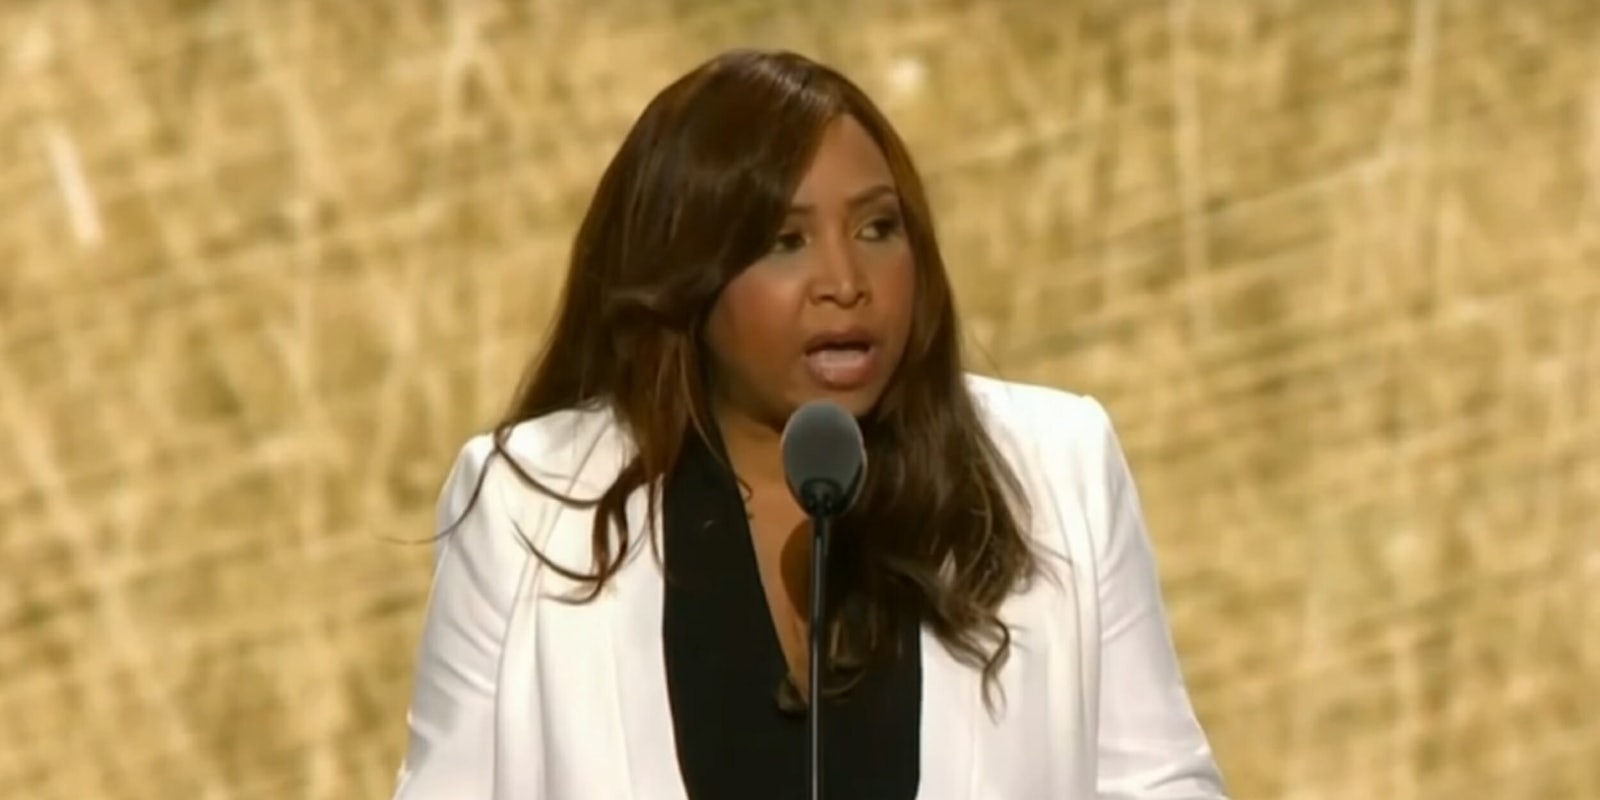 Lynne Patton of The Eric Trump Foundation speaks at the RNC in Cleveland.